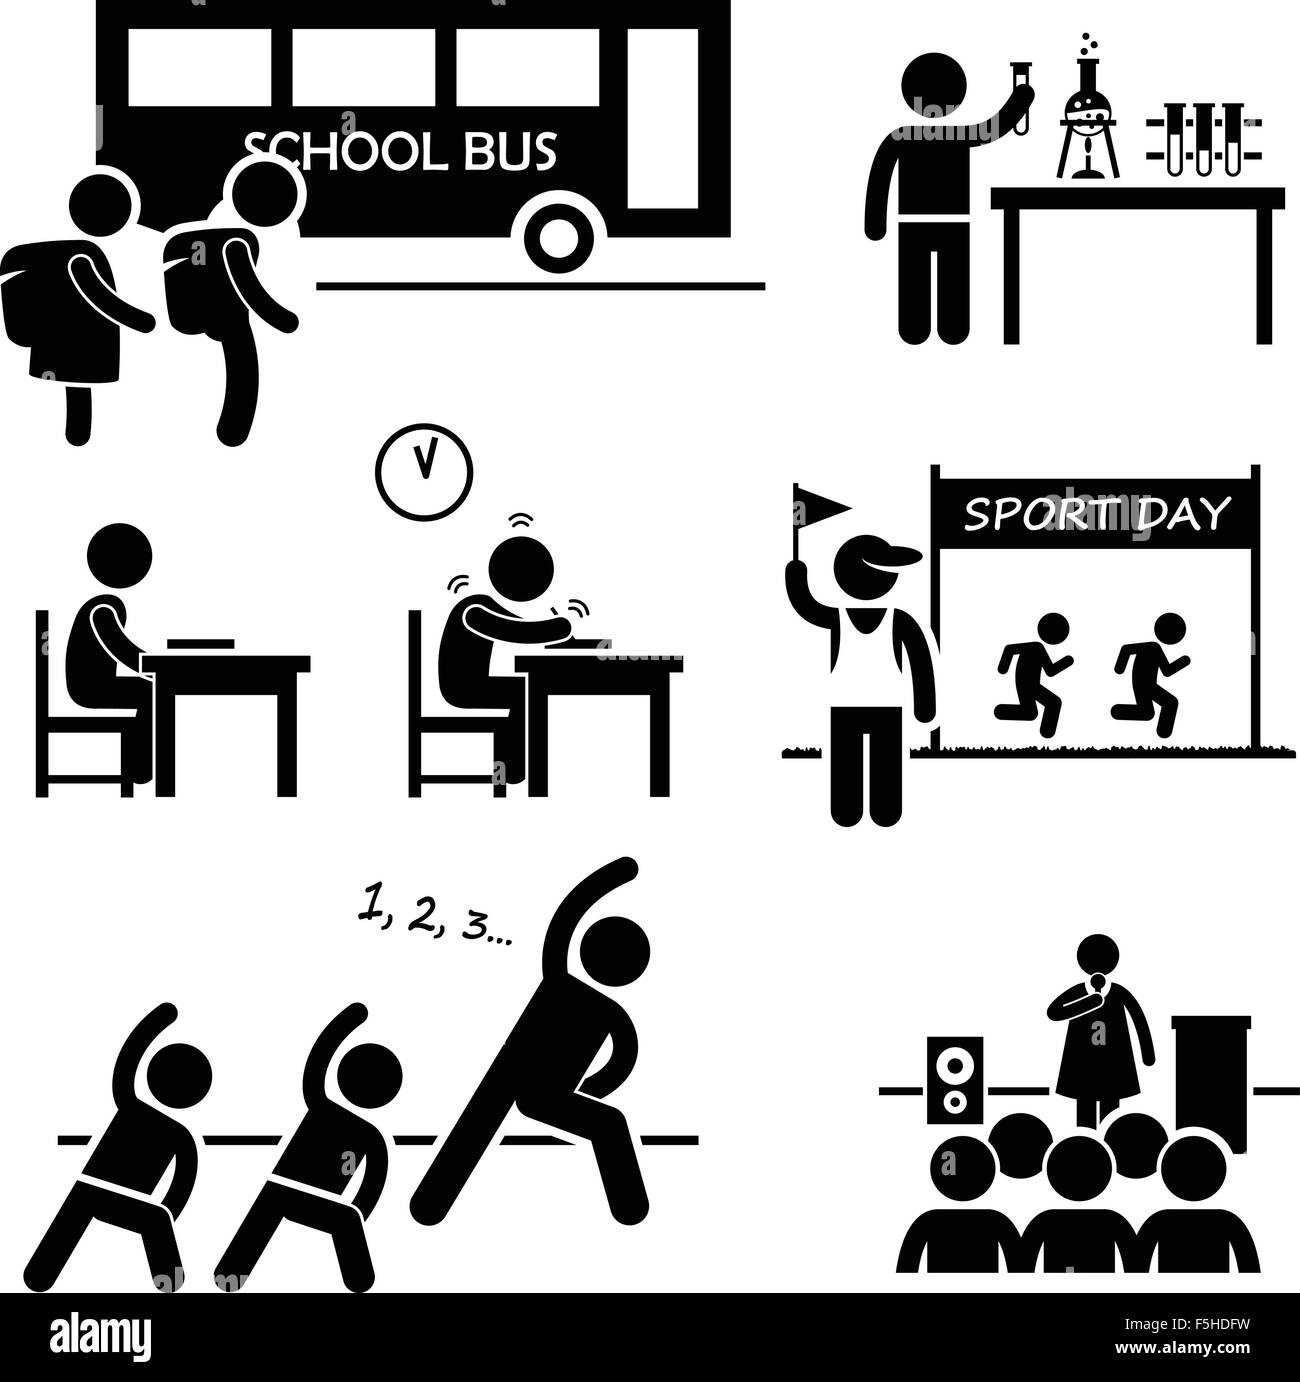 School Activity Event for Student Stick Figure Pictogram Icon Clipart Stock Vector